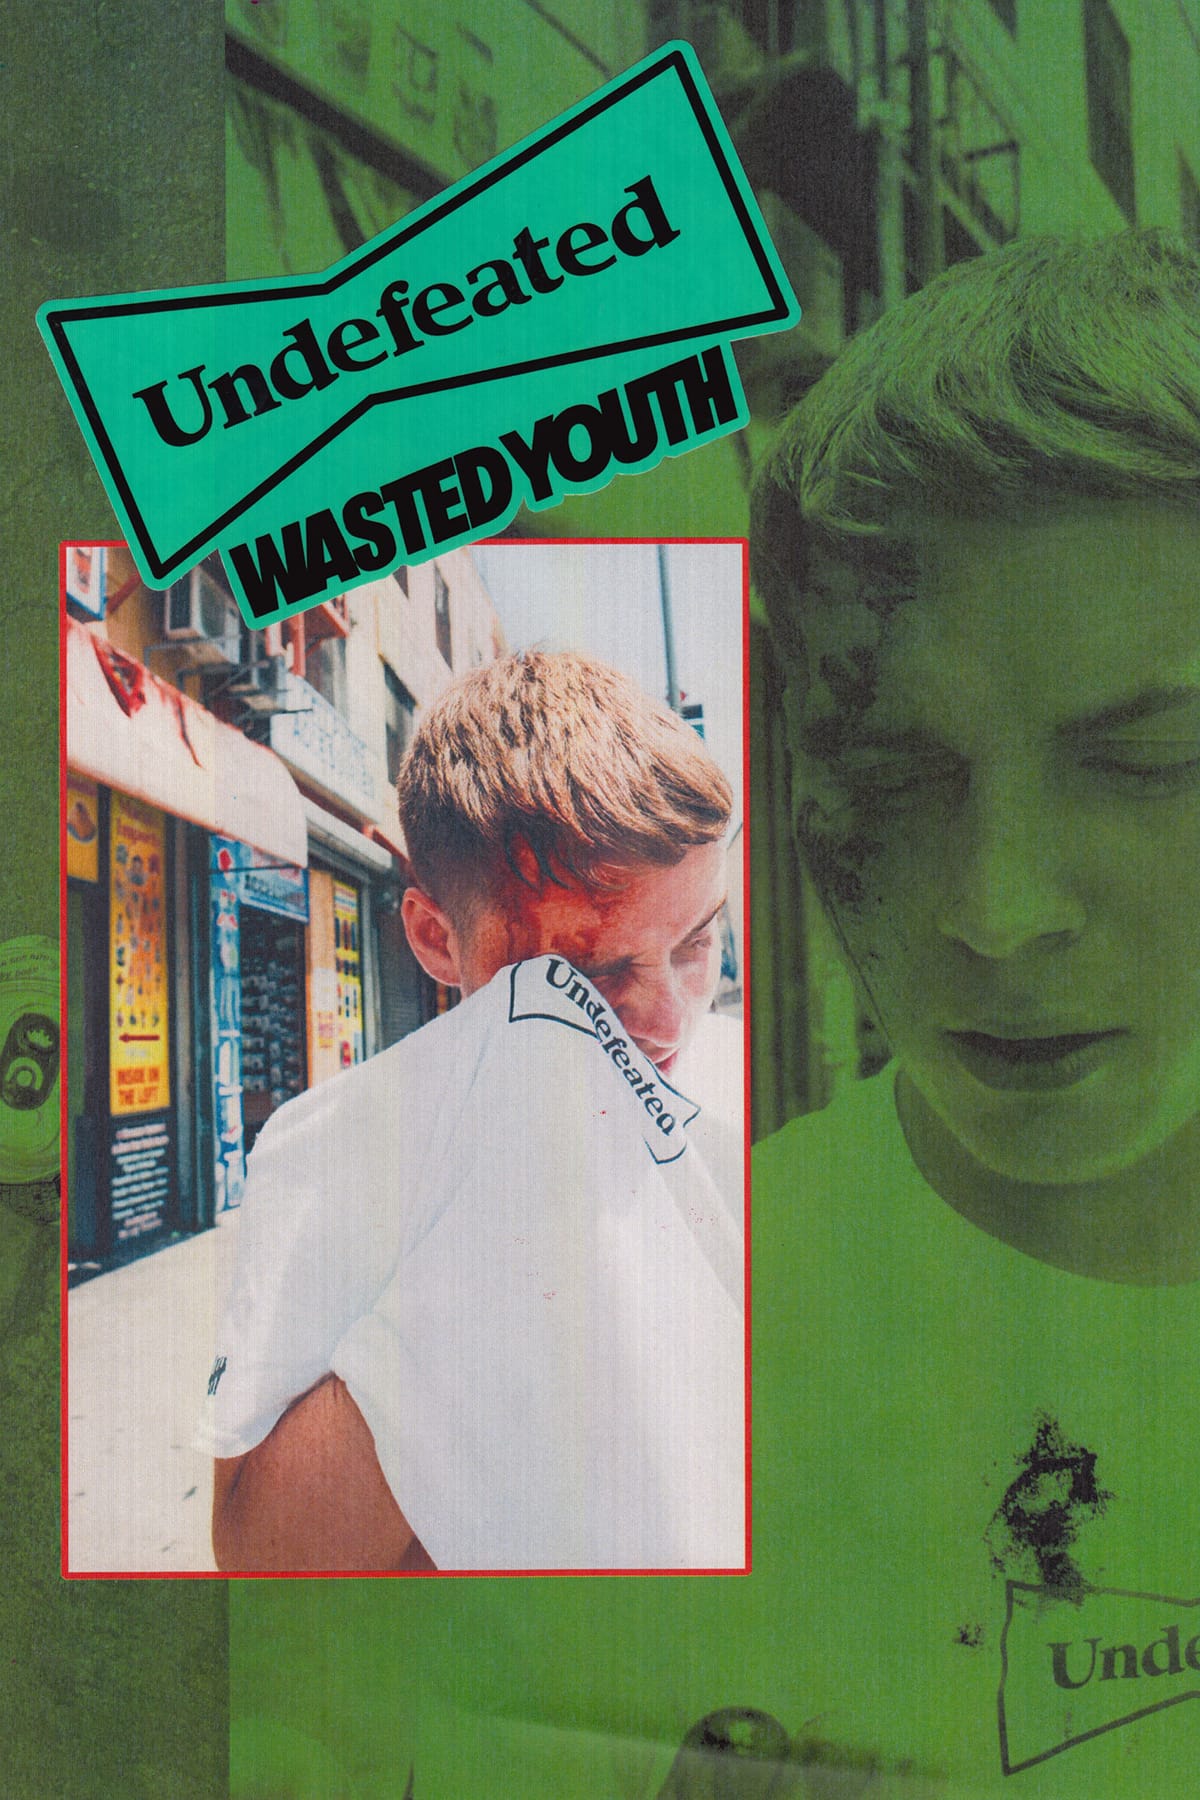 UNDEFEATED x Wasted Youth by verdy